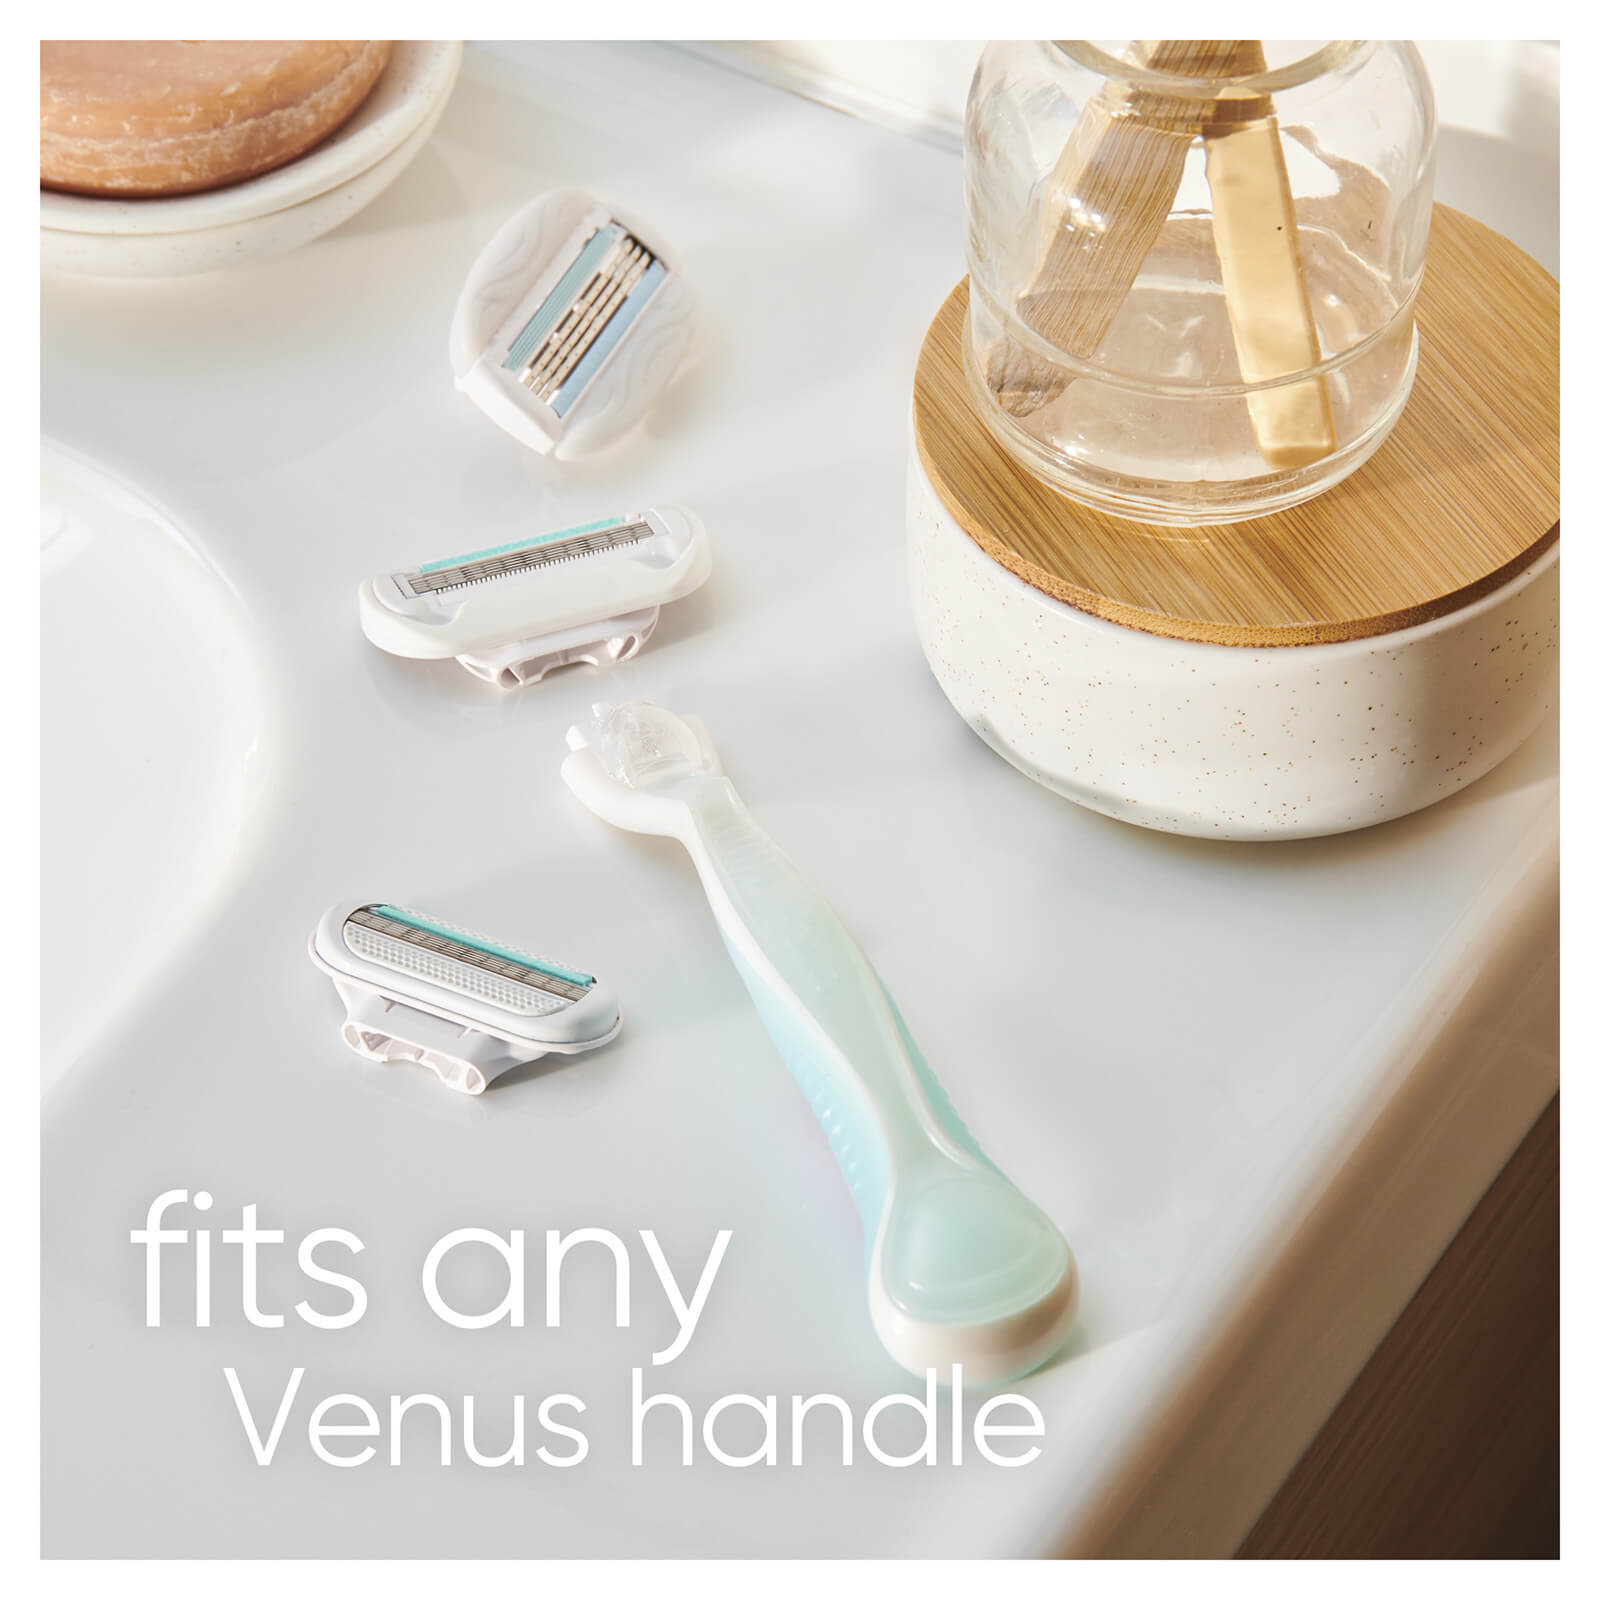 Image 1 Product on sink with other blades, fits any Venus handle